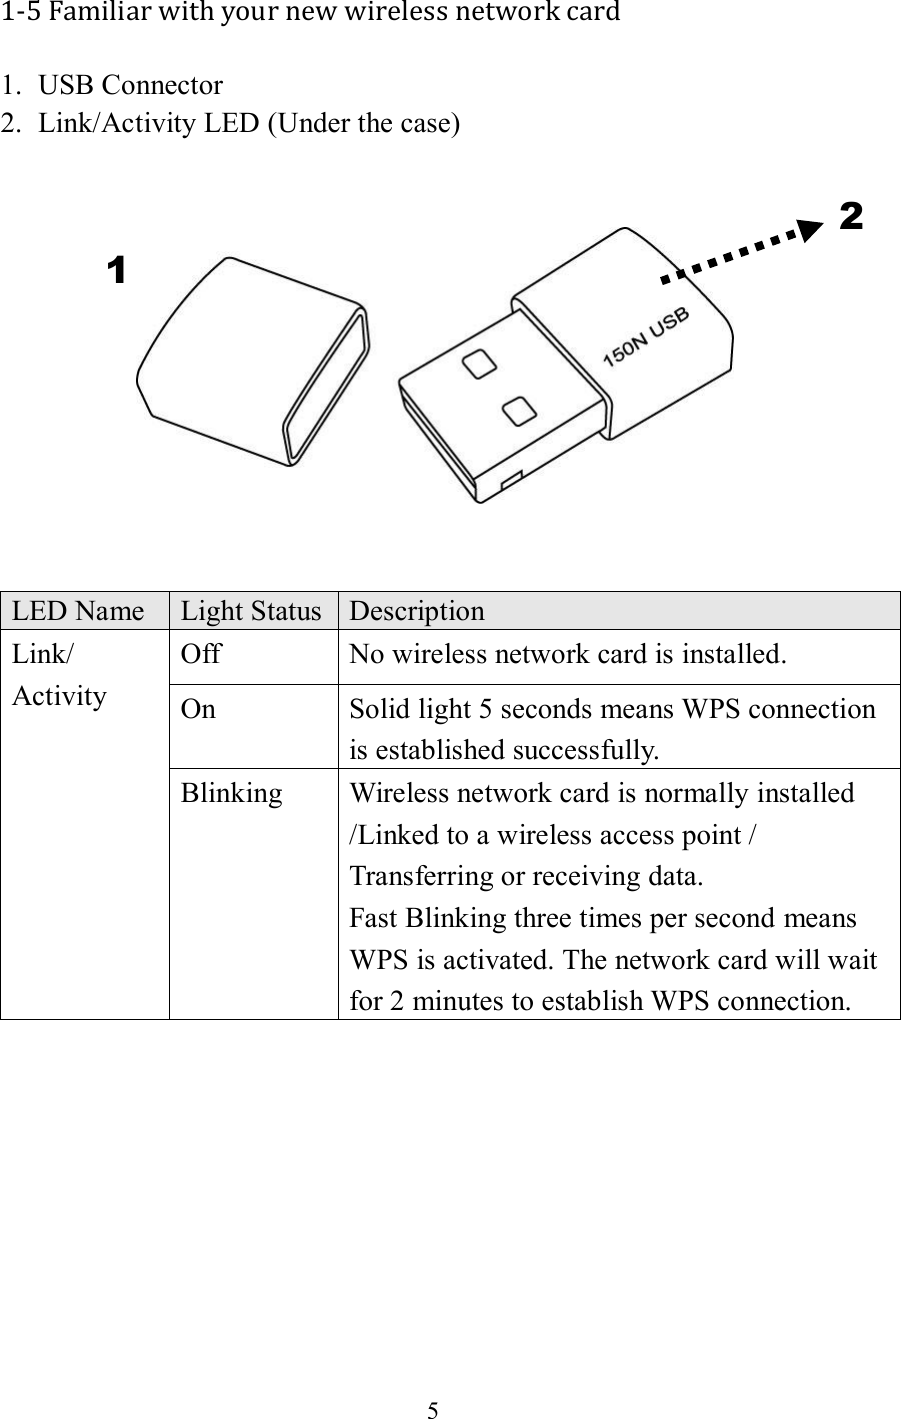 5  1-5 Familiar with your new wireless network card 1. USB Connector 2. Link/Activity LED (Under the case)      LED Name Light Status Description Link/ Activity Off No wireless network card is installed. On Solid light 5 seconds means WPS connection is established successfully. Blinking Wireless network card is normally installed /Linked to a wireless access point / Transferring or receiving data. Fast Blinking three times per second means WPS is activated. The network card will wait for 2 minutes to establish WPS connection.   1 2 